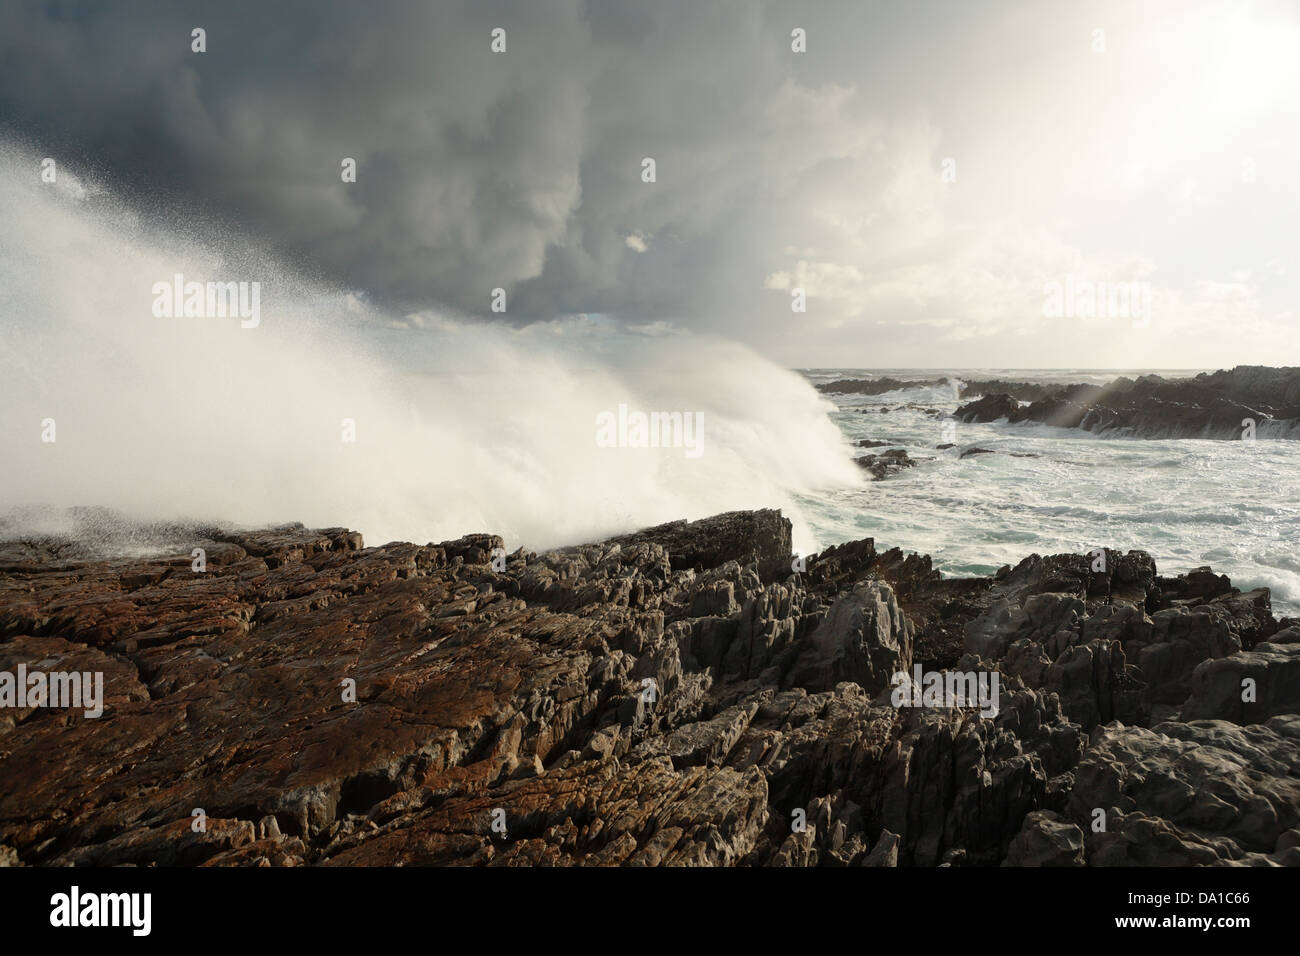 Rough waves on overcast day at Danger Point, Gansbaai, Western Cape Province, South Africa Stock Photo